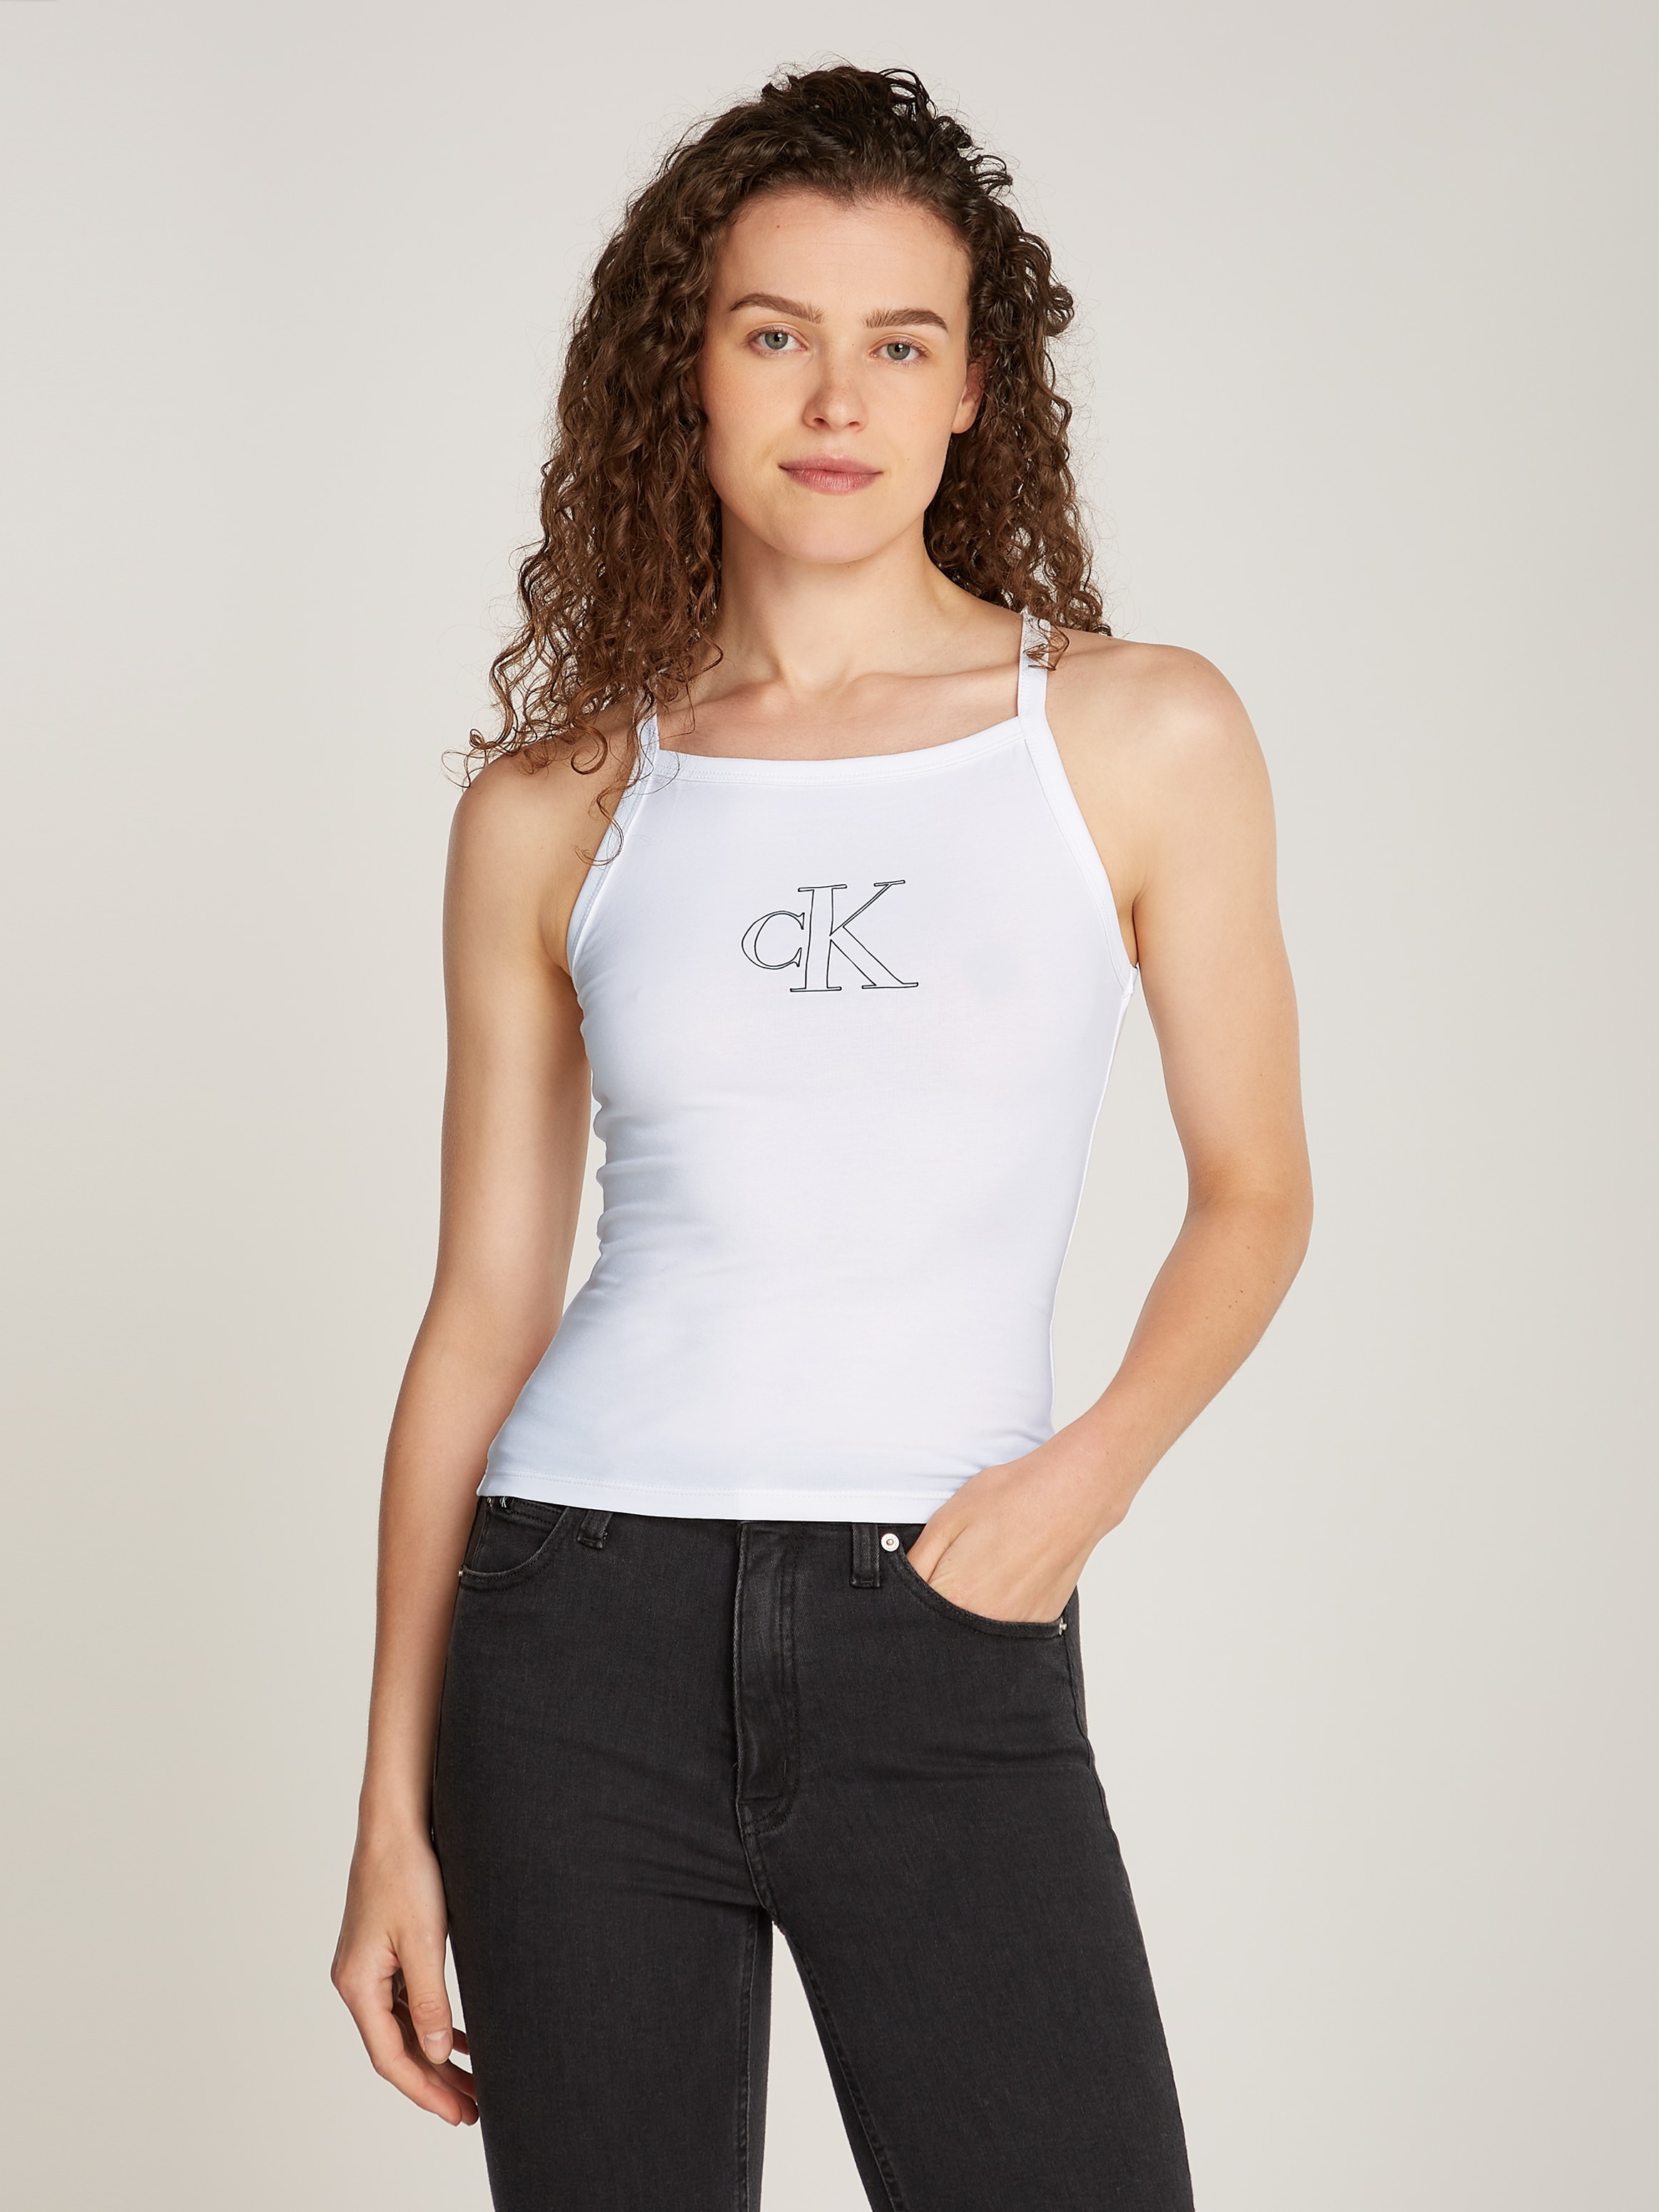 Calvin Klein Jeans Spaghettitop »OUTLINED CK STRAPPY TANK«, mit Markenlabel